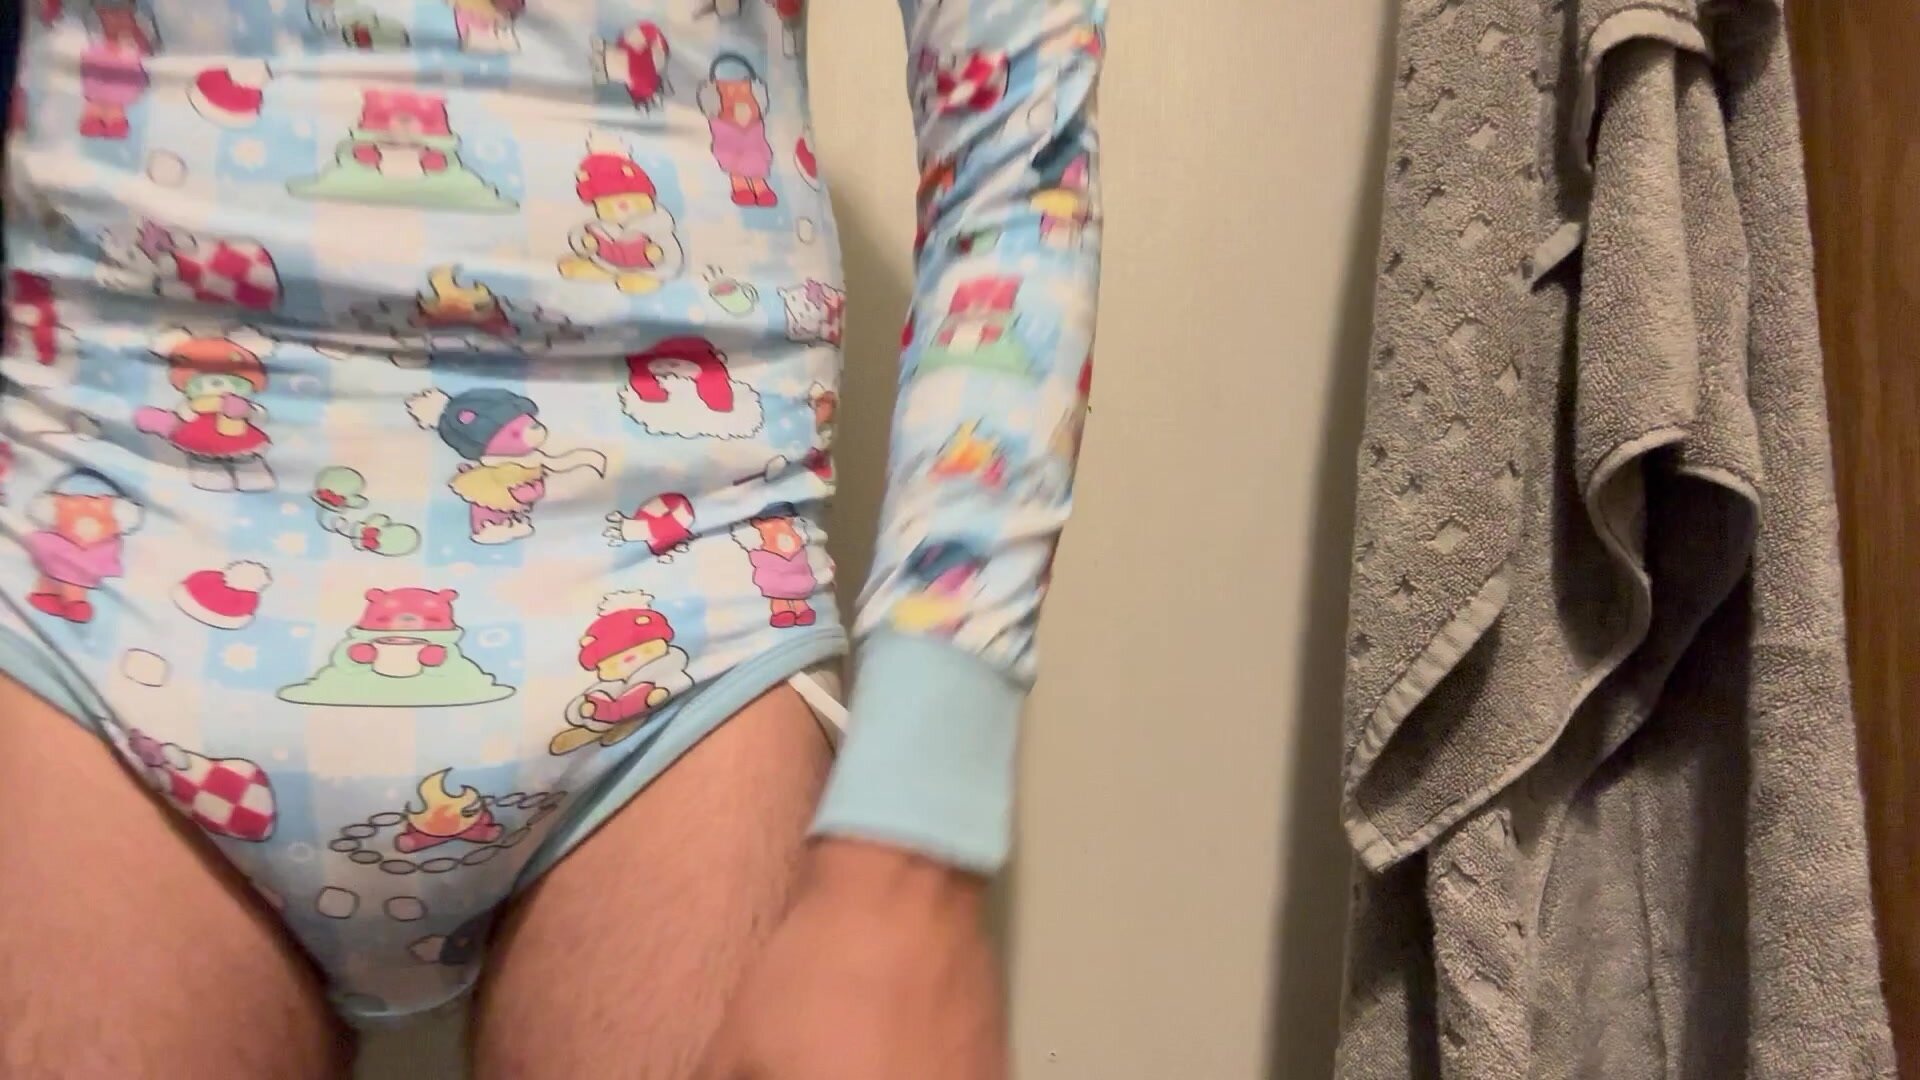 Showing  messy diaper